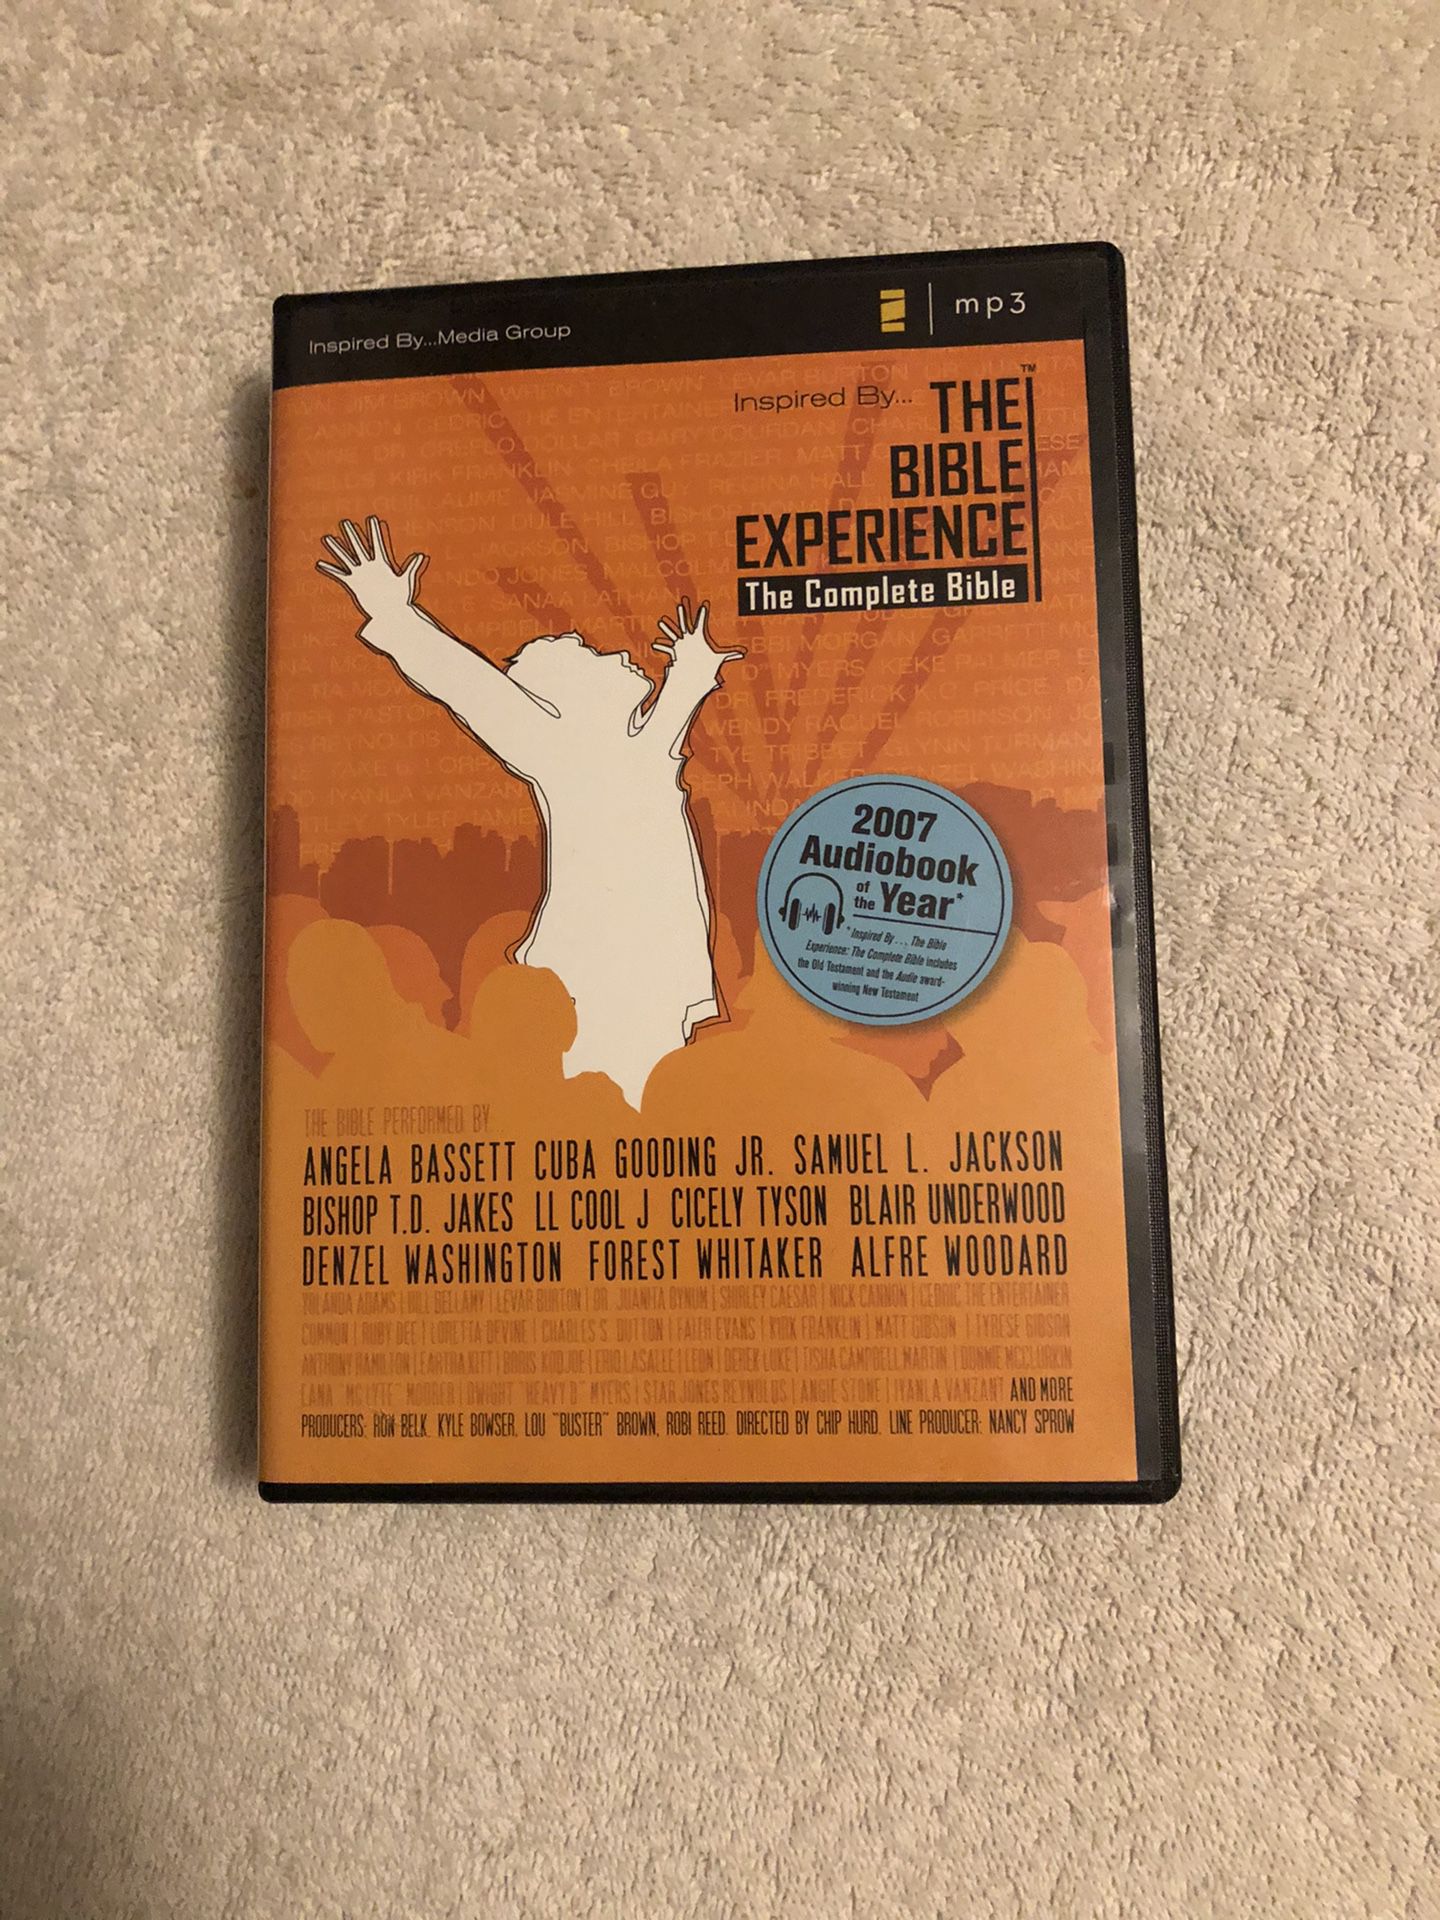 The Bible Experience. The Complete Bible